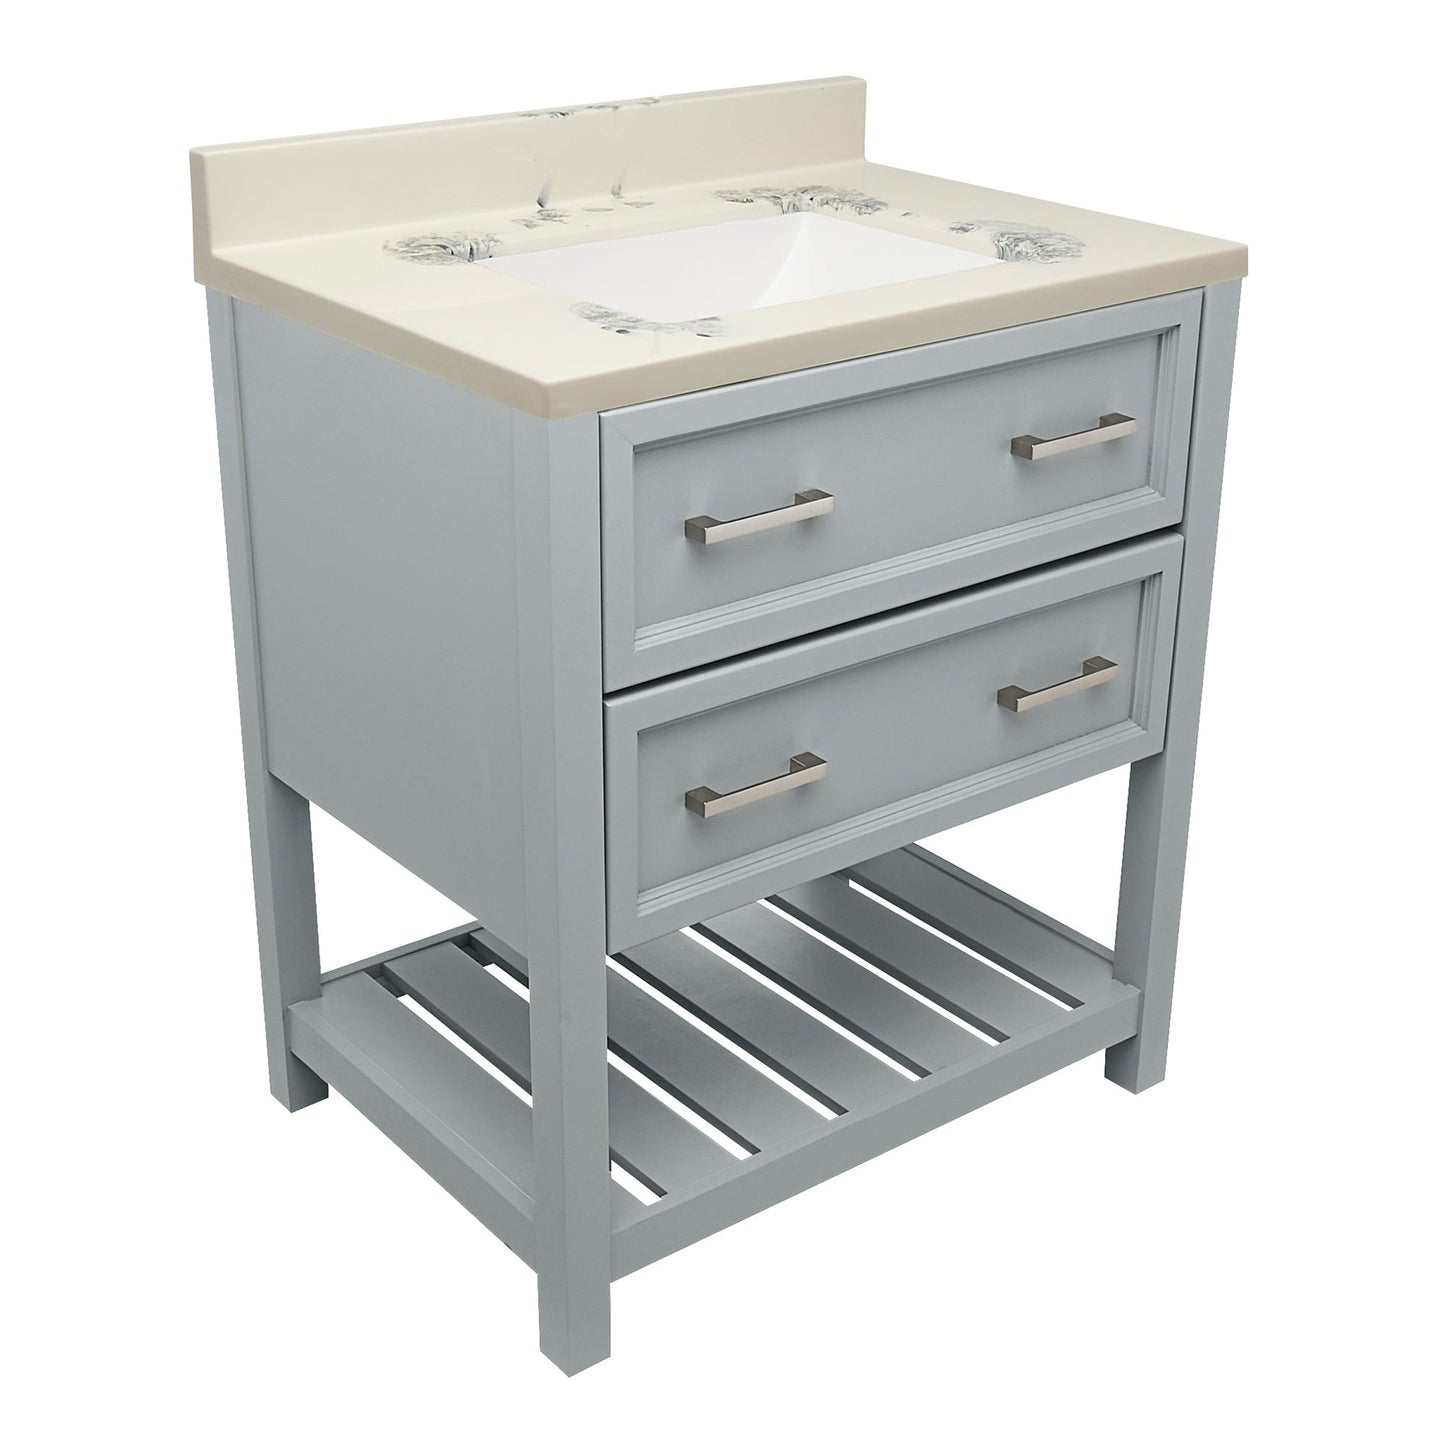 Ella's Bubbles Tremblant 31" Gray Bathroom Vanity With Carrara White Cultured Marble Top With Backsplash and Sink